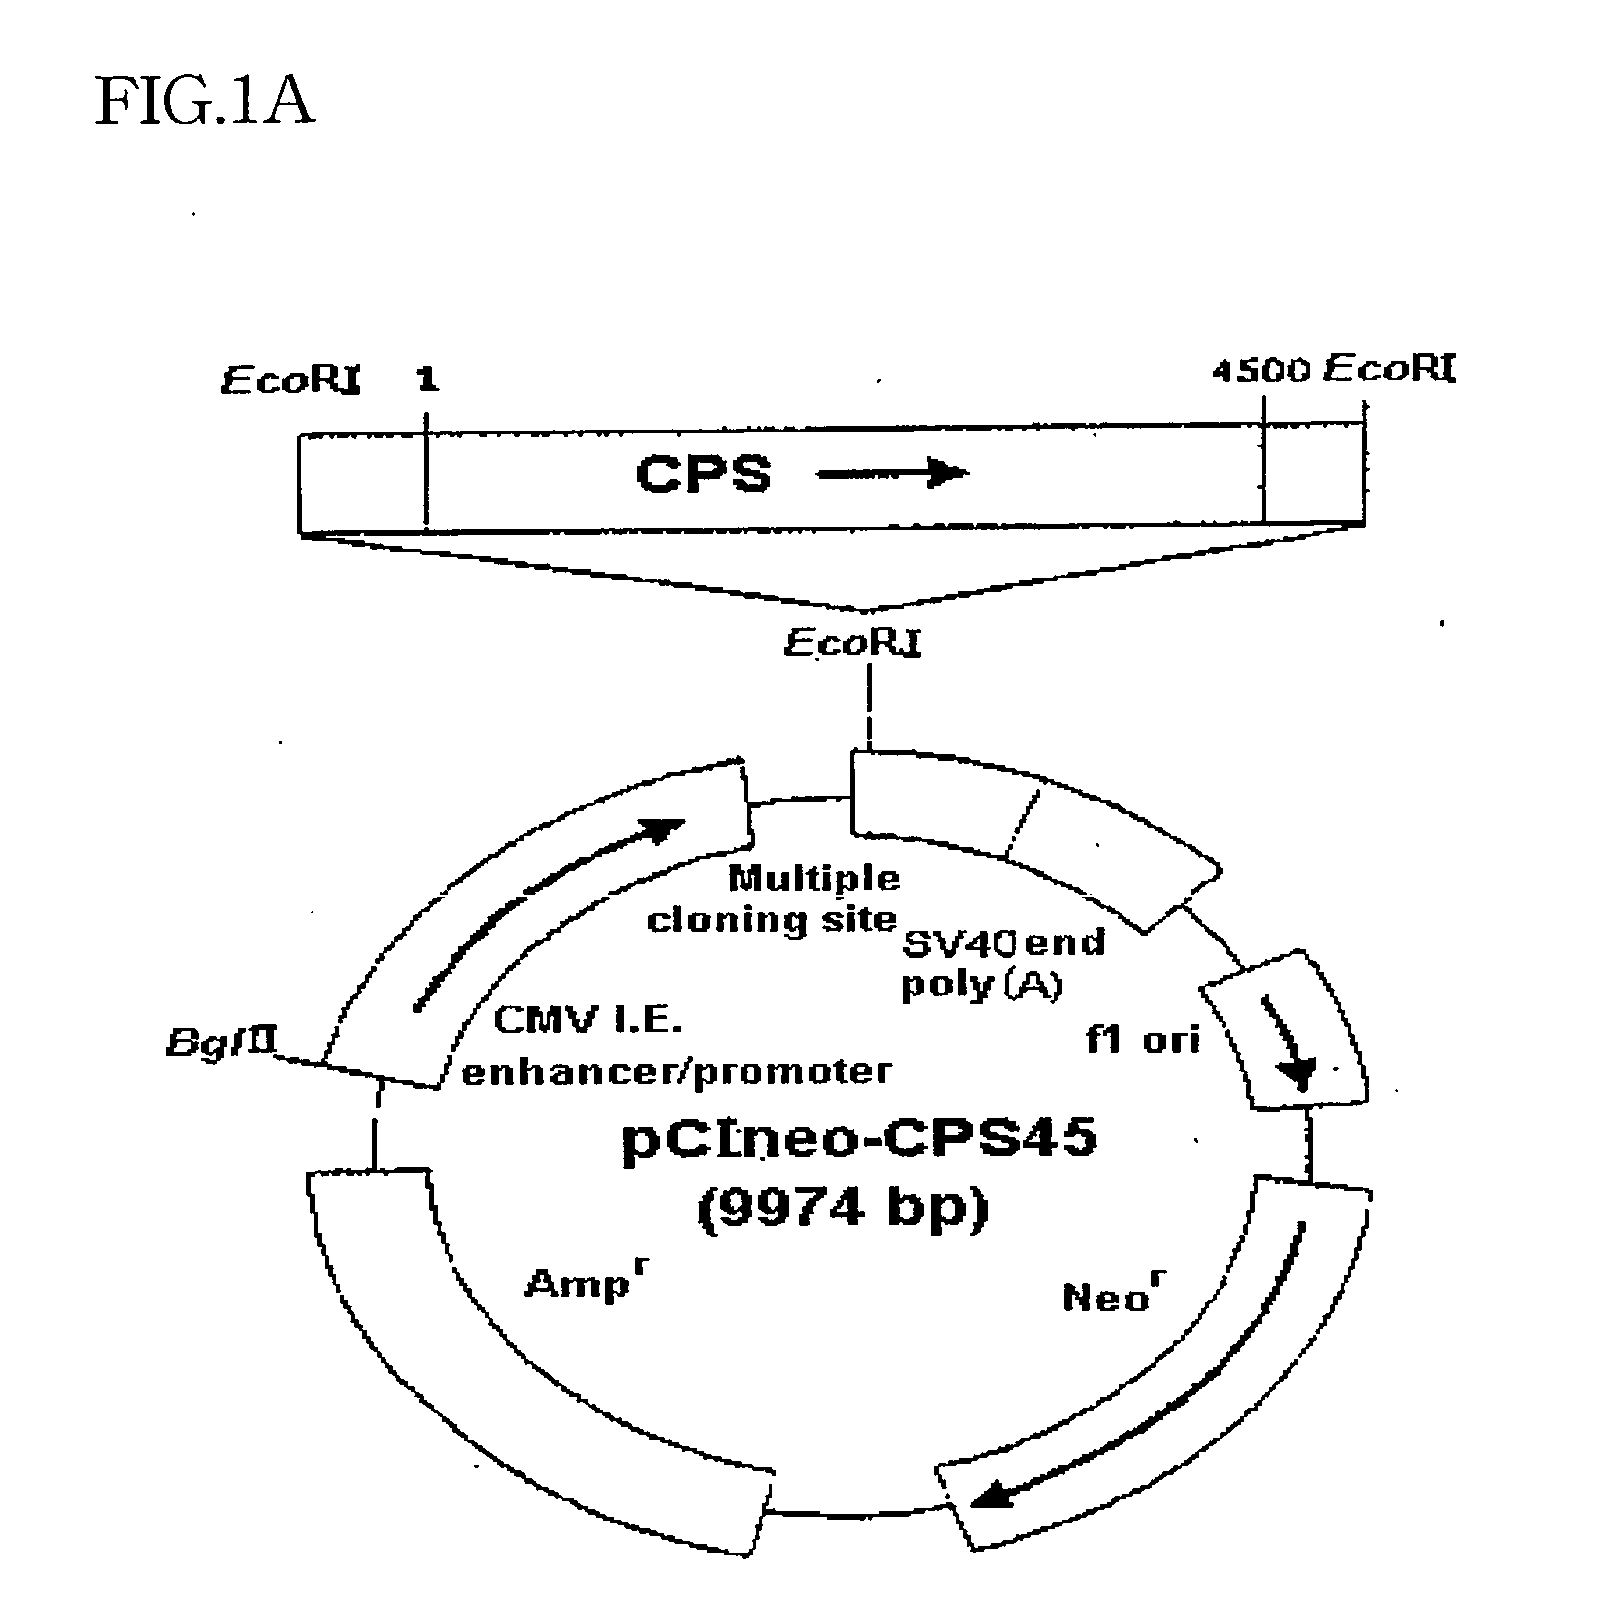 Expression vector containing urea cycle enzyme gene, transformant thereof, and use of transformant for protein over-expression